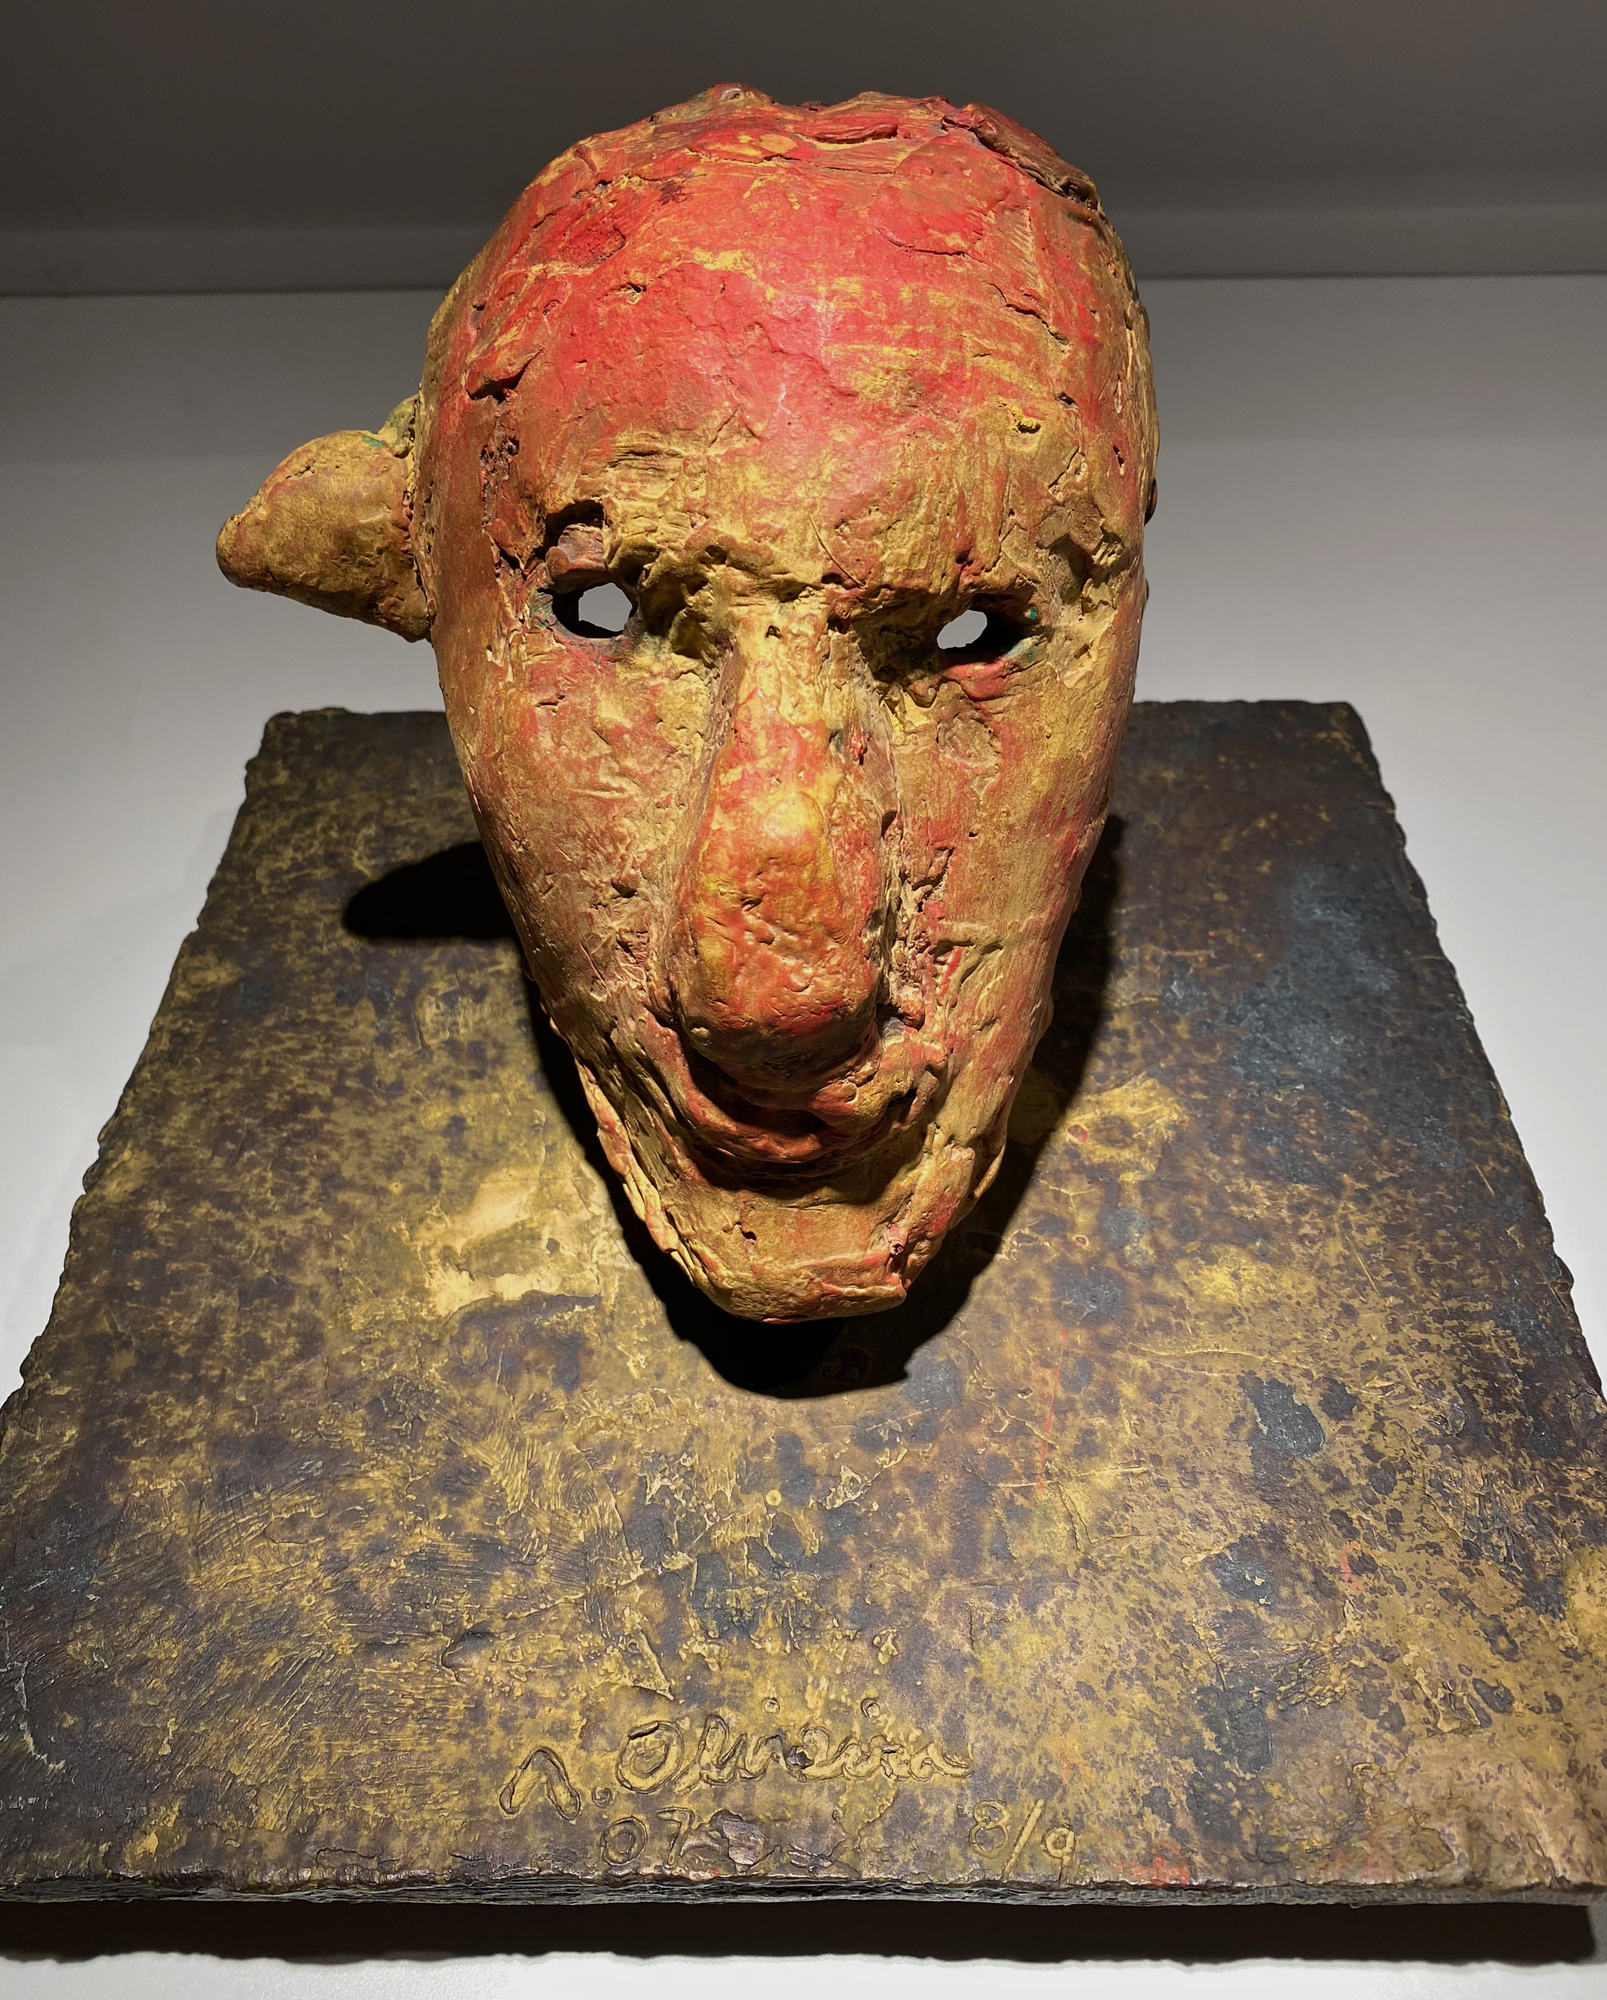 NATHAN OLIVEIRA - Mask #6 (Maroon with Green Ear) - bronze and acrylic - 9 x 11 3/4 x 11 3/4 in.